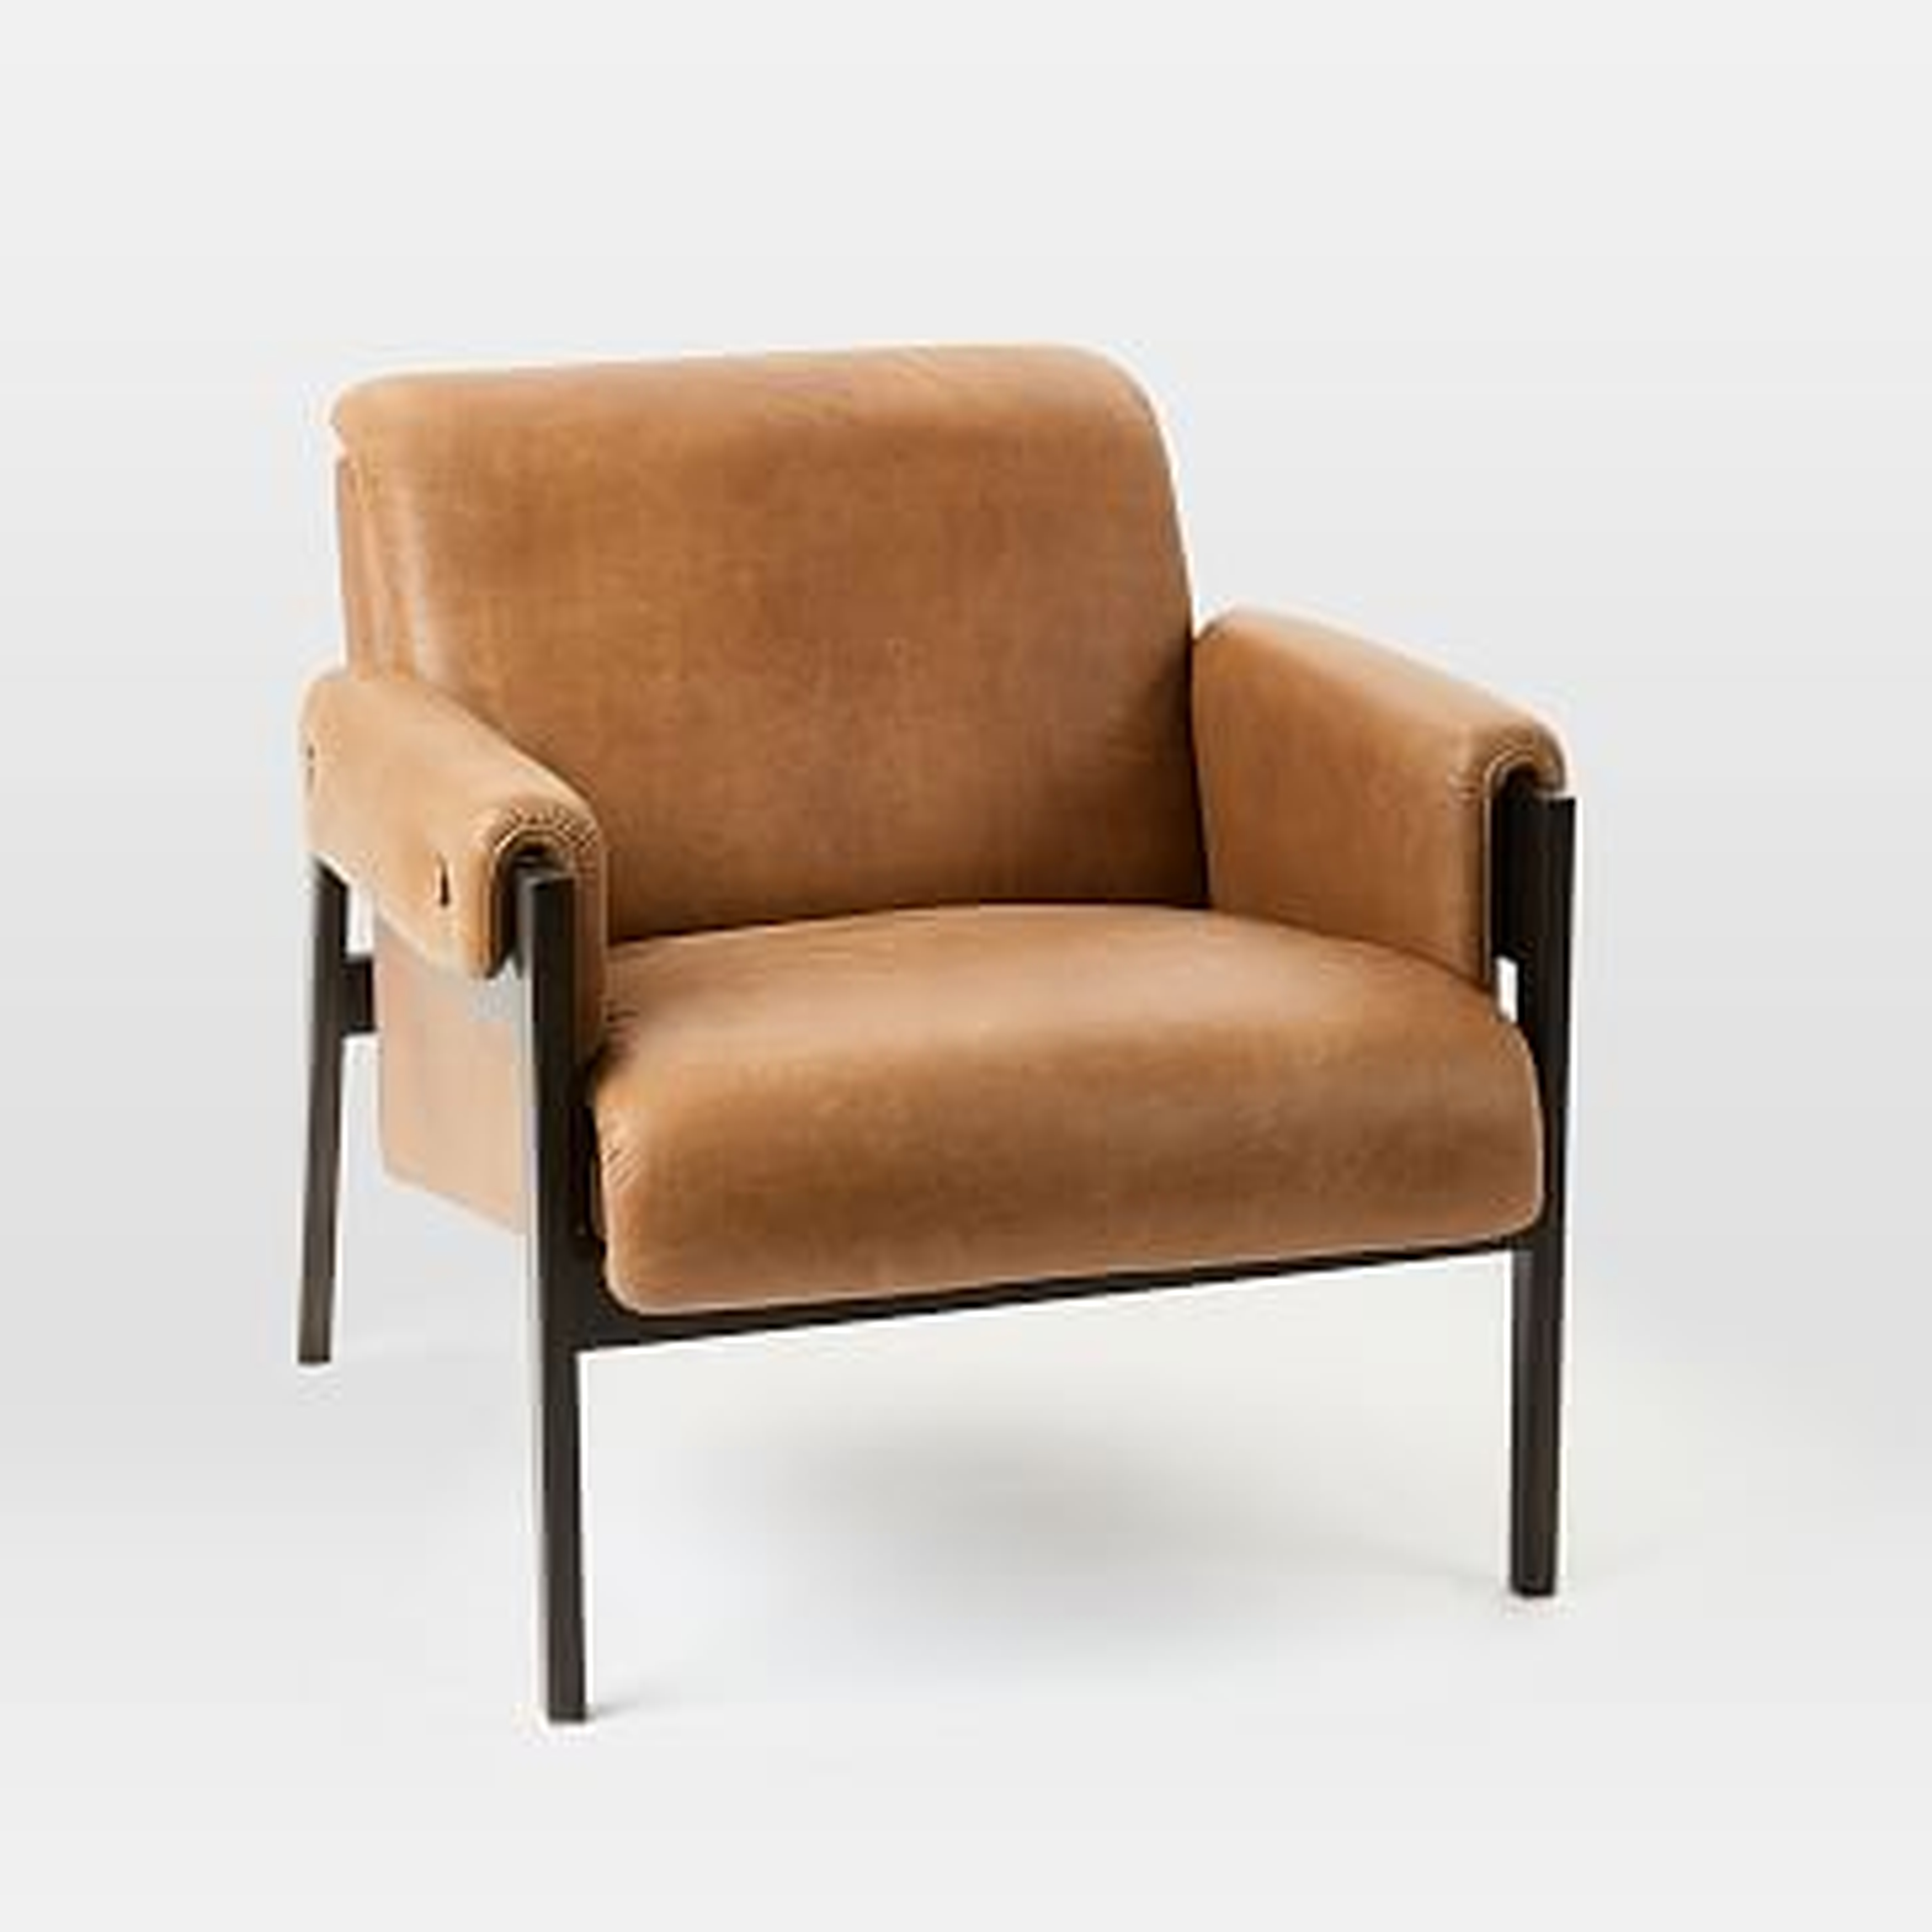 Stanton Chair, Taos Leather, Sand - West Elm